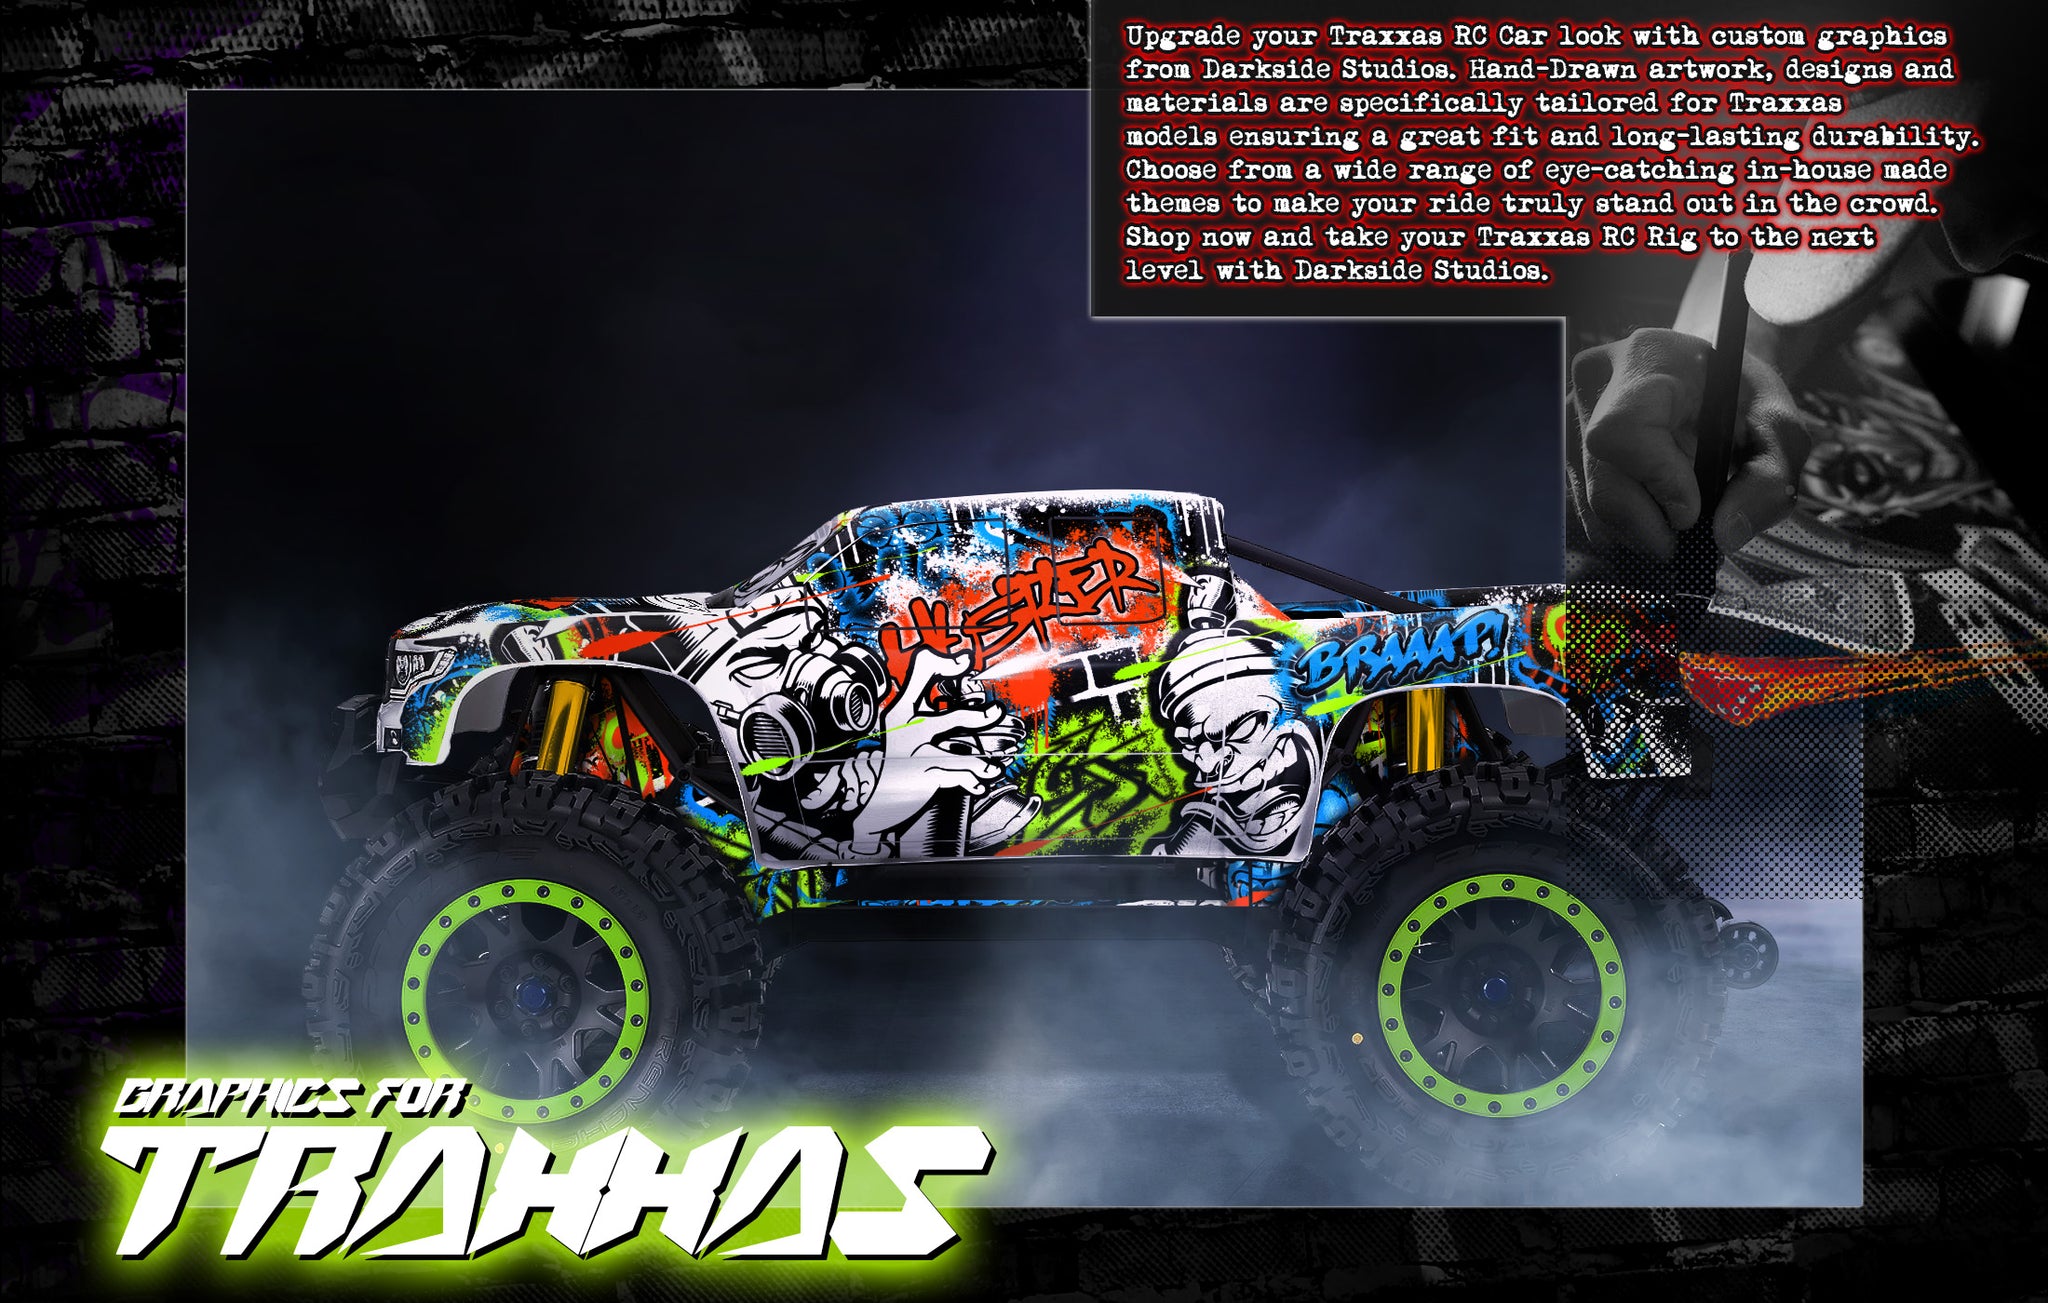 Elevate the appearance of your Traxxas RC car body with a personalized touch, courtesy of Darkside Studio Arts LLC's body skin protective graphics.